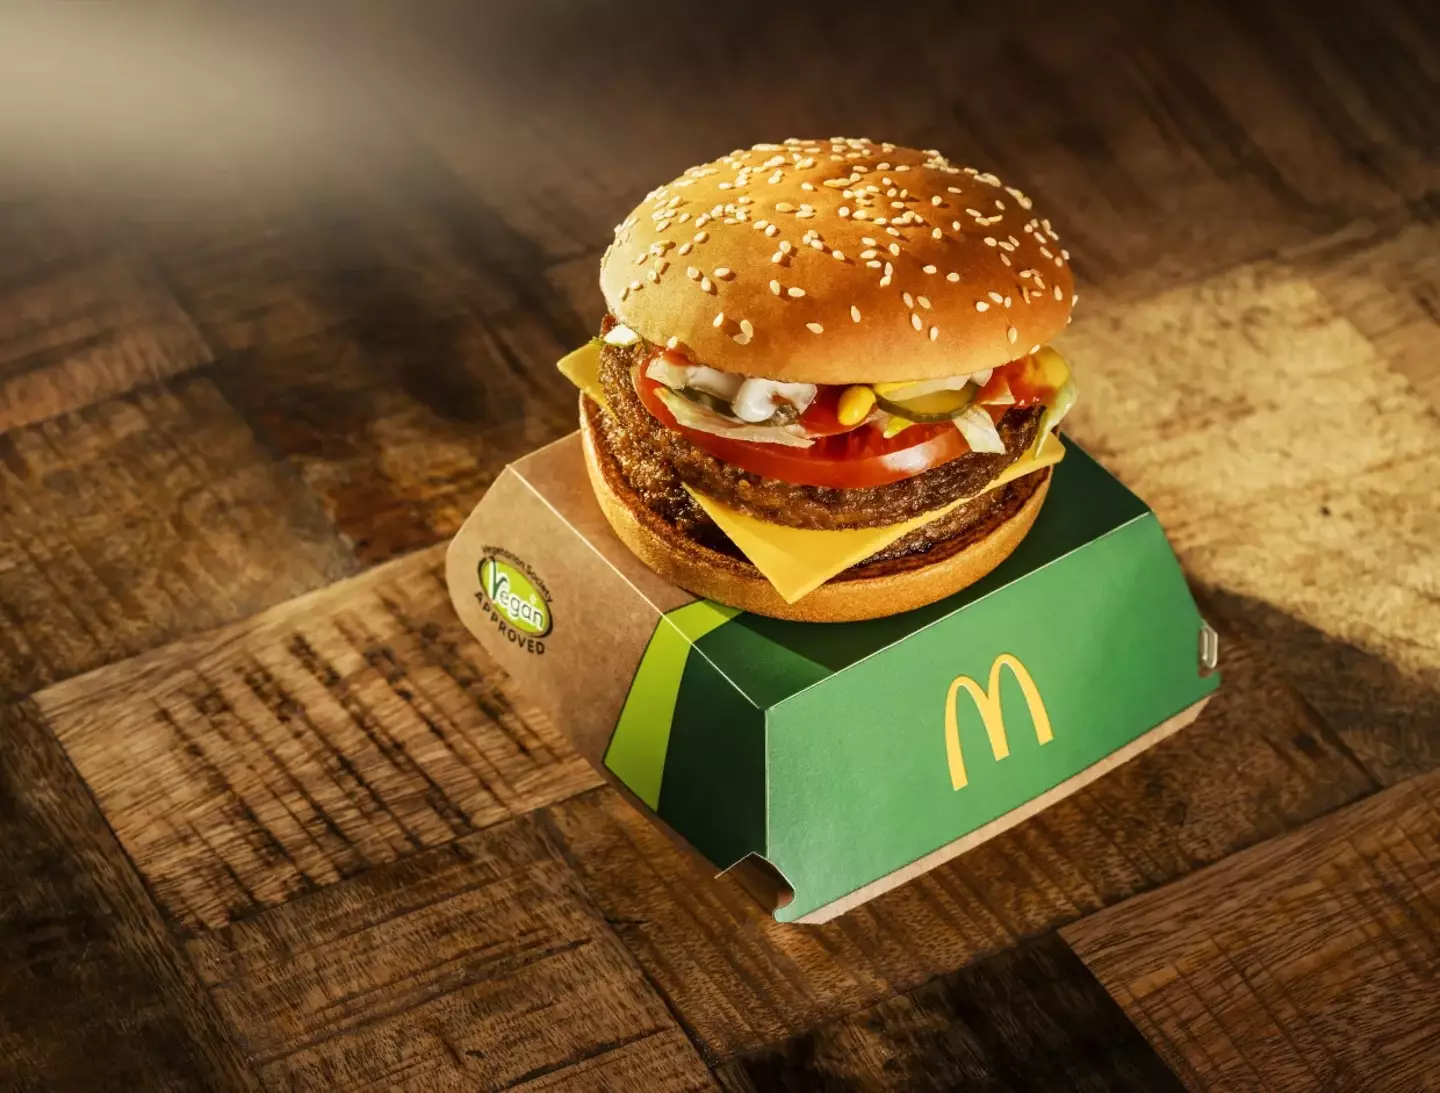 Maccies has had the bright idea of doubling up and launching the Double McPlant burger, which has not one but two Beyond Meat® patties.